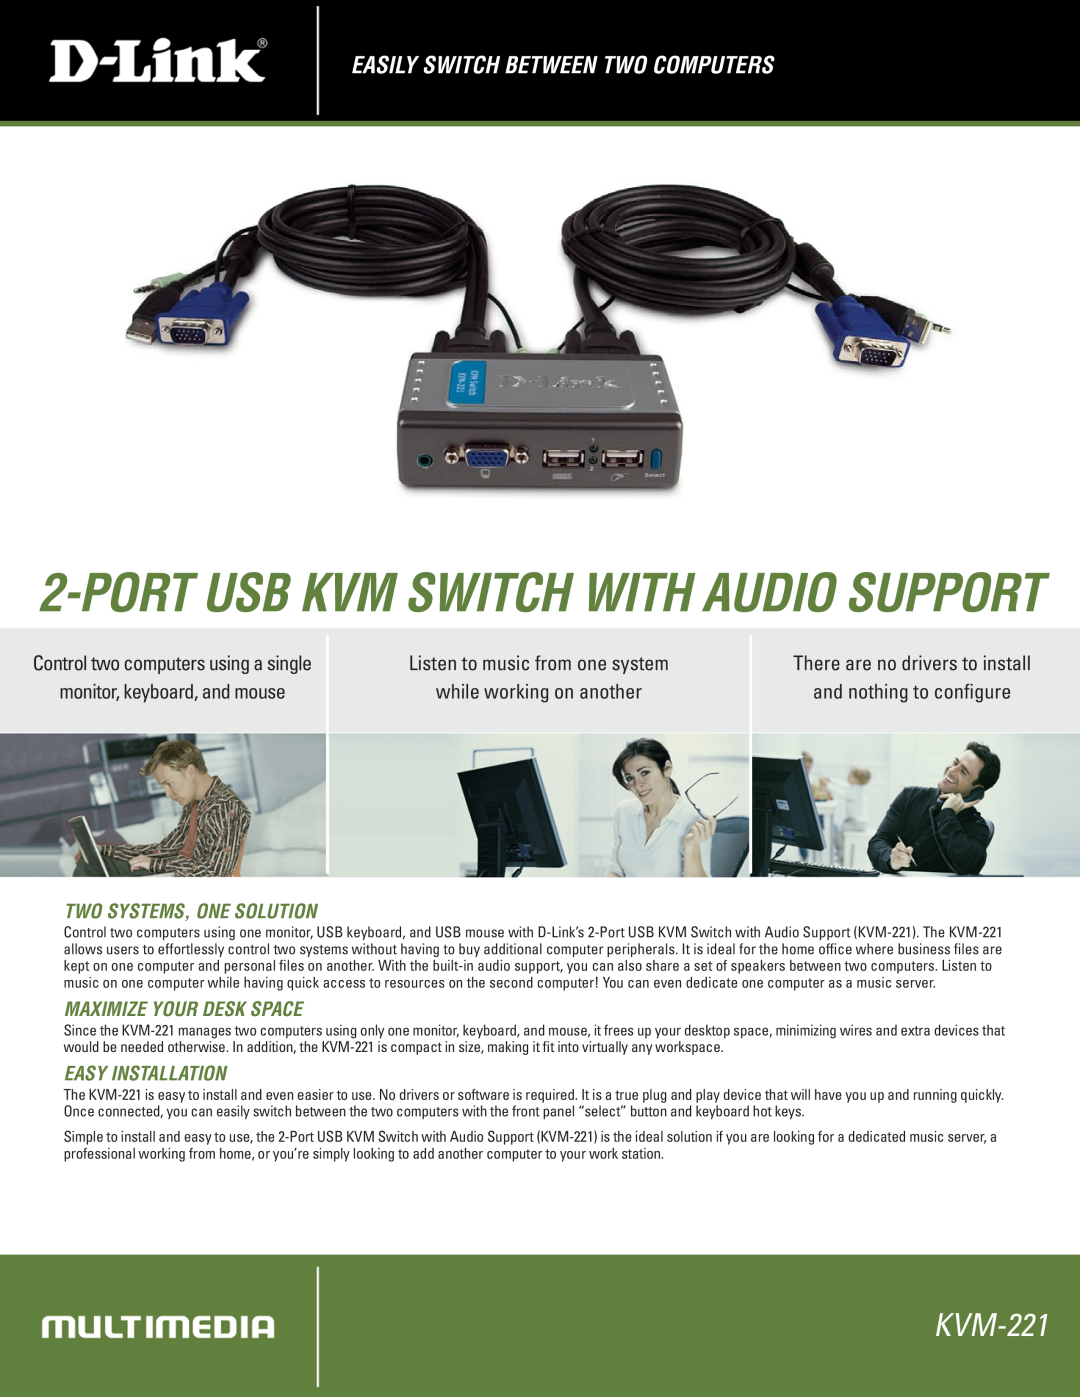 D-Link KVM-221 manual Easily Switch Between Two Computers, Two Systems, One Solution, Maximize Your Desk Space 